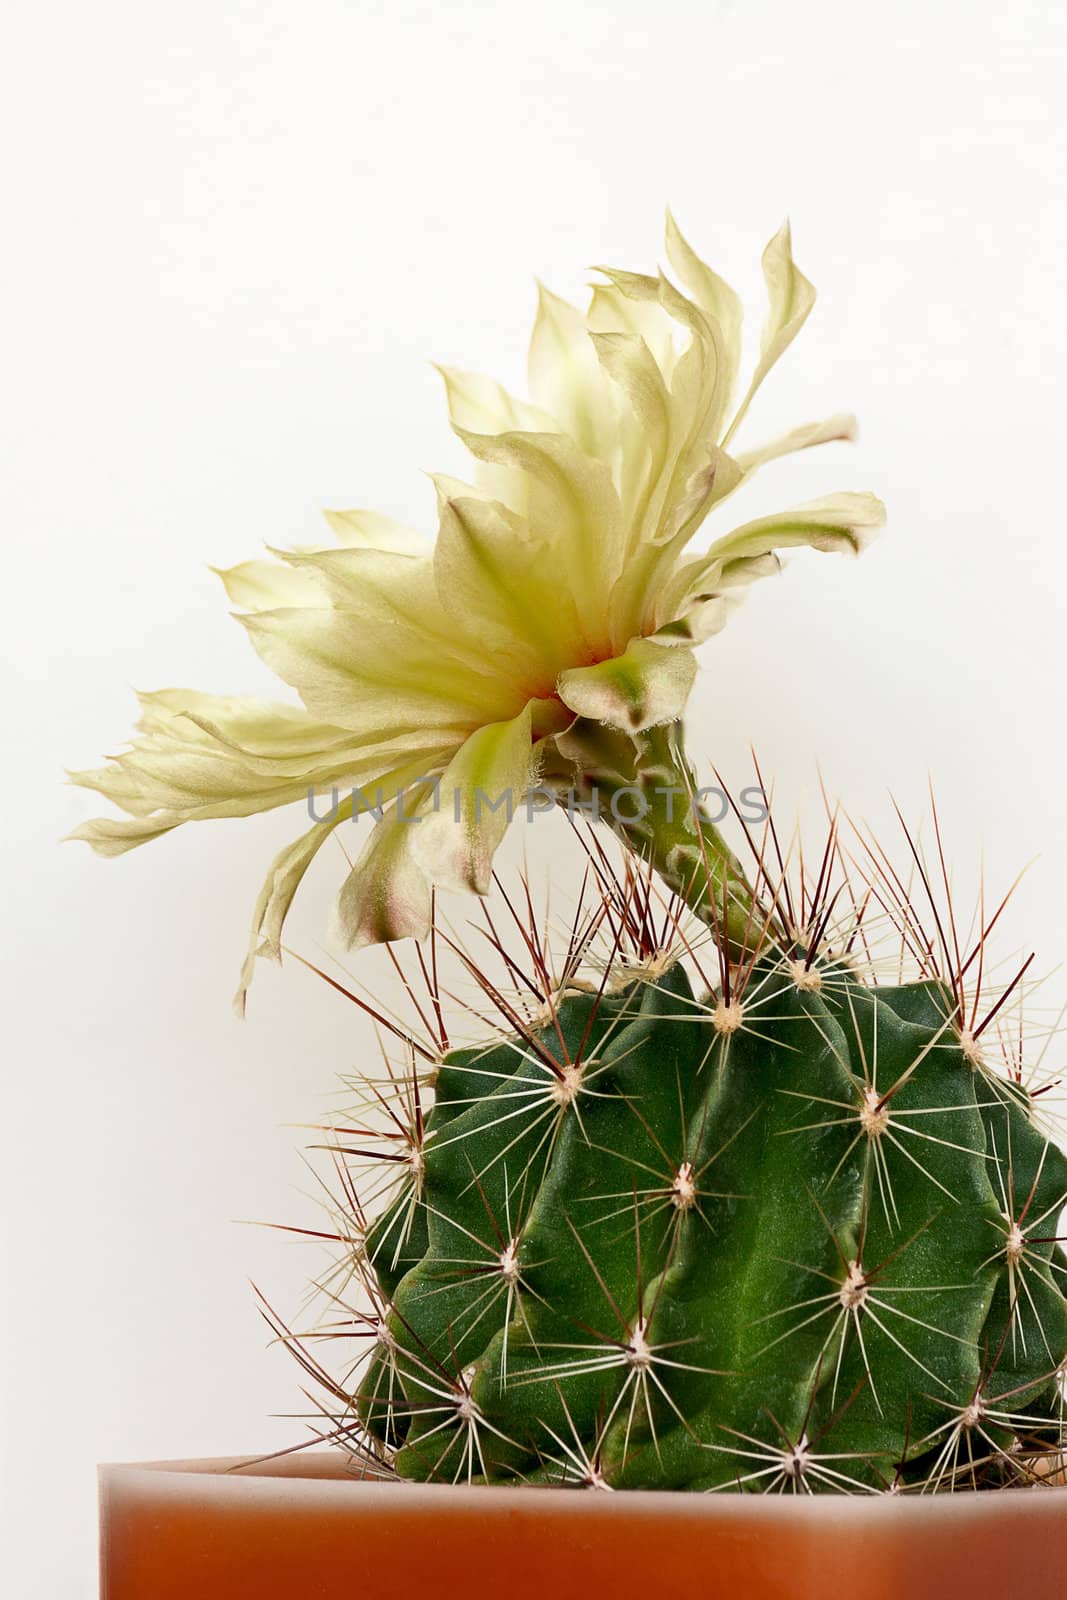 Cactus with flowers  on dark  background (Notocactus).Image with shallow depth of field.